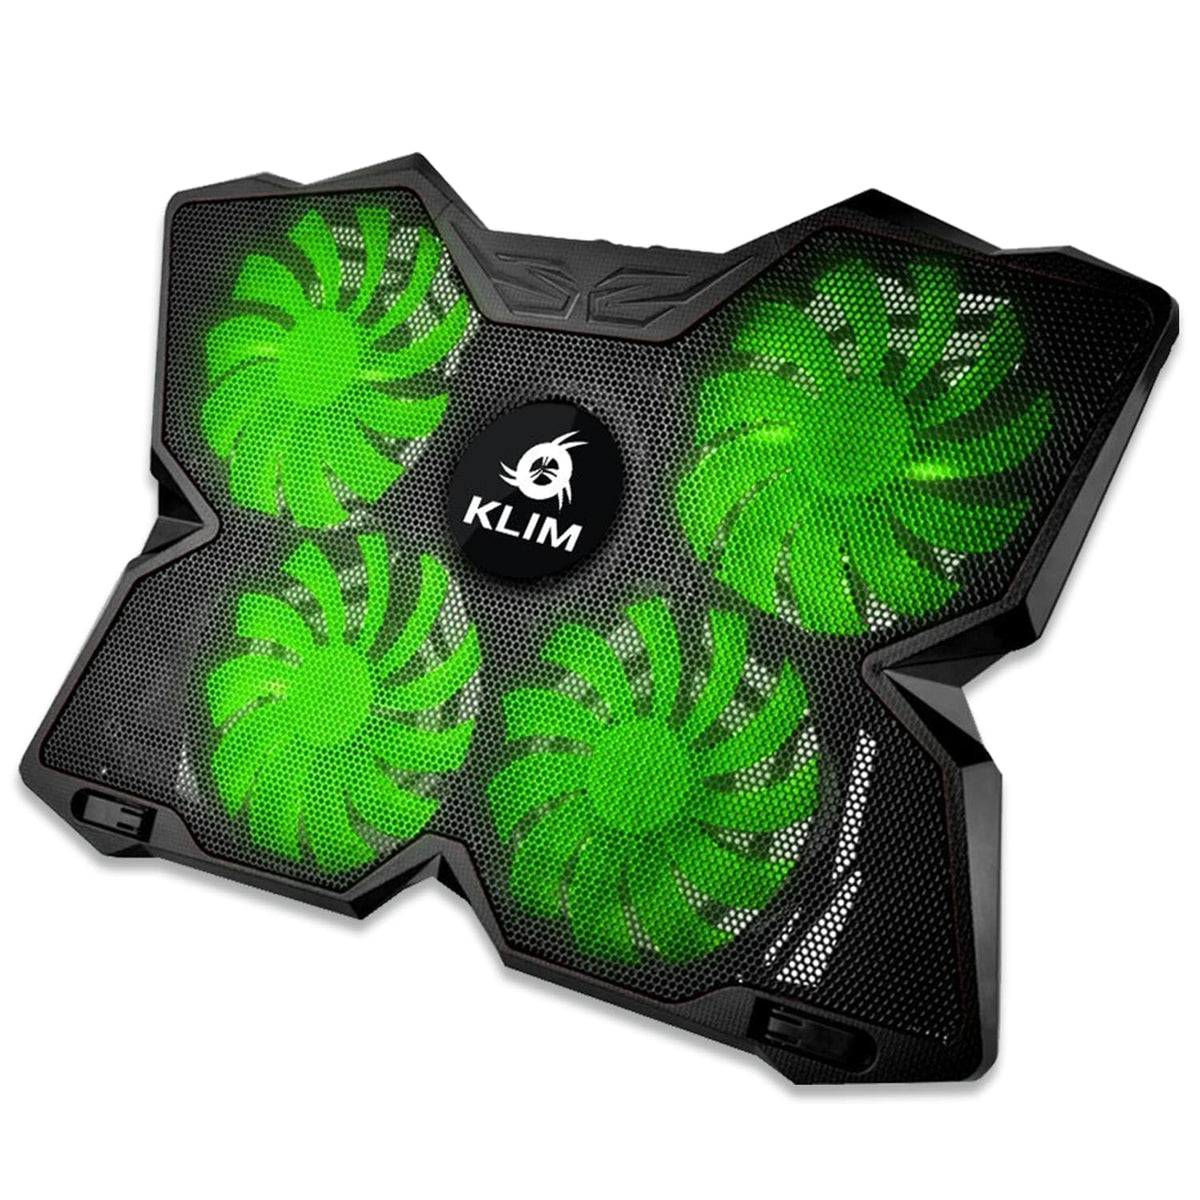 KLIM Wind Laptop Cooling Pad - More Than 500 000 Units Sold - New 2023 - The Most Powerful Rapid Action Cooling Fan - Laptop Stand with 4 Cooling Fans at 1200 RPM - USB Fan - PS5 PS4 - Green